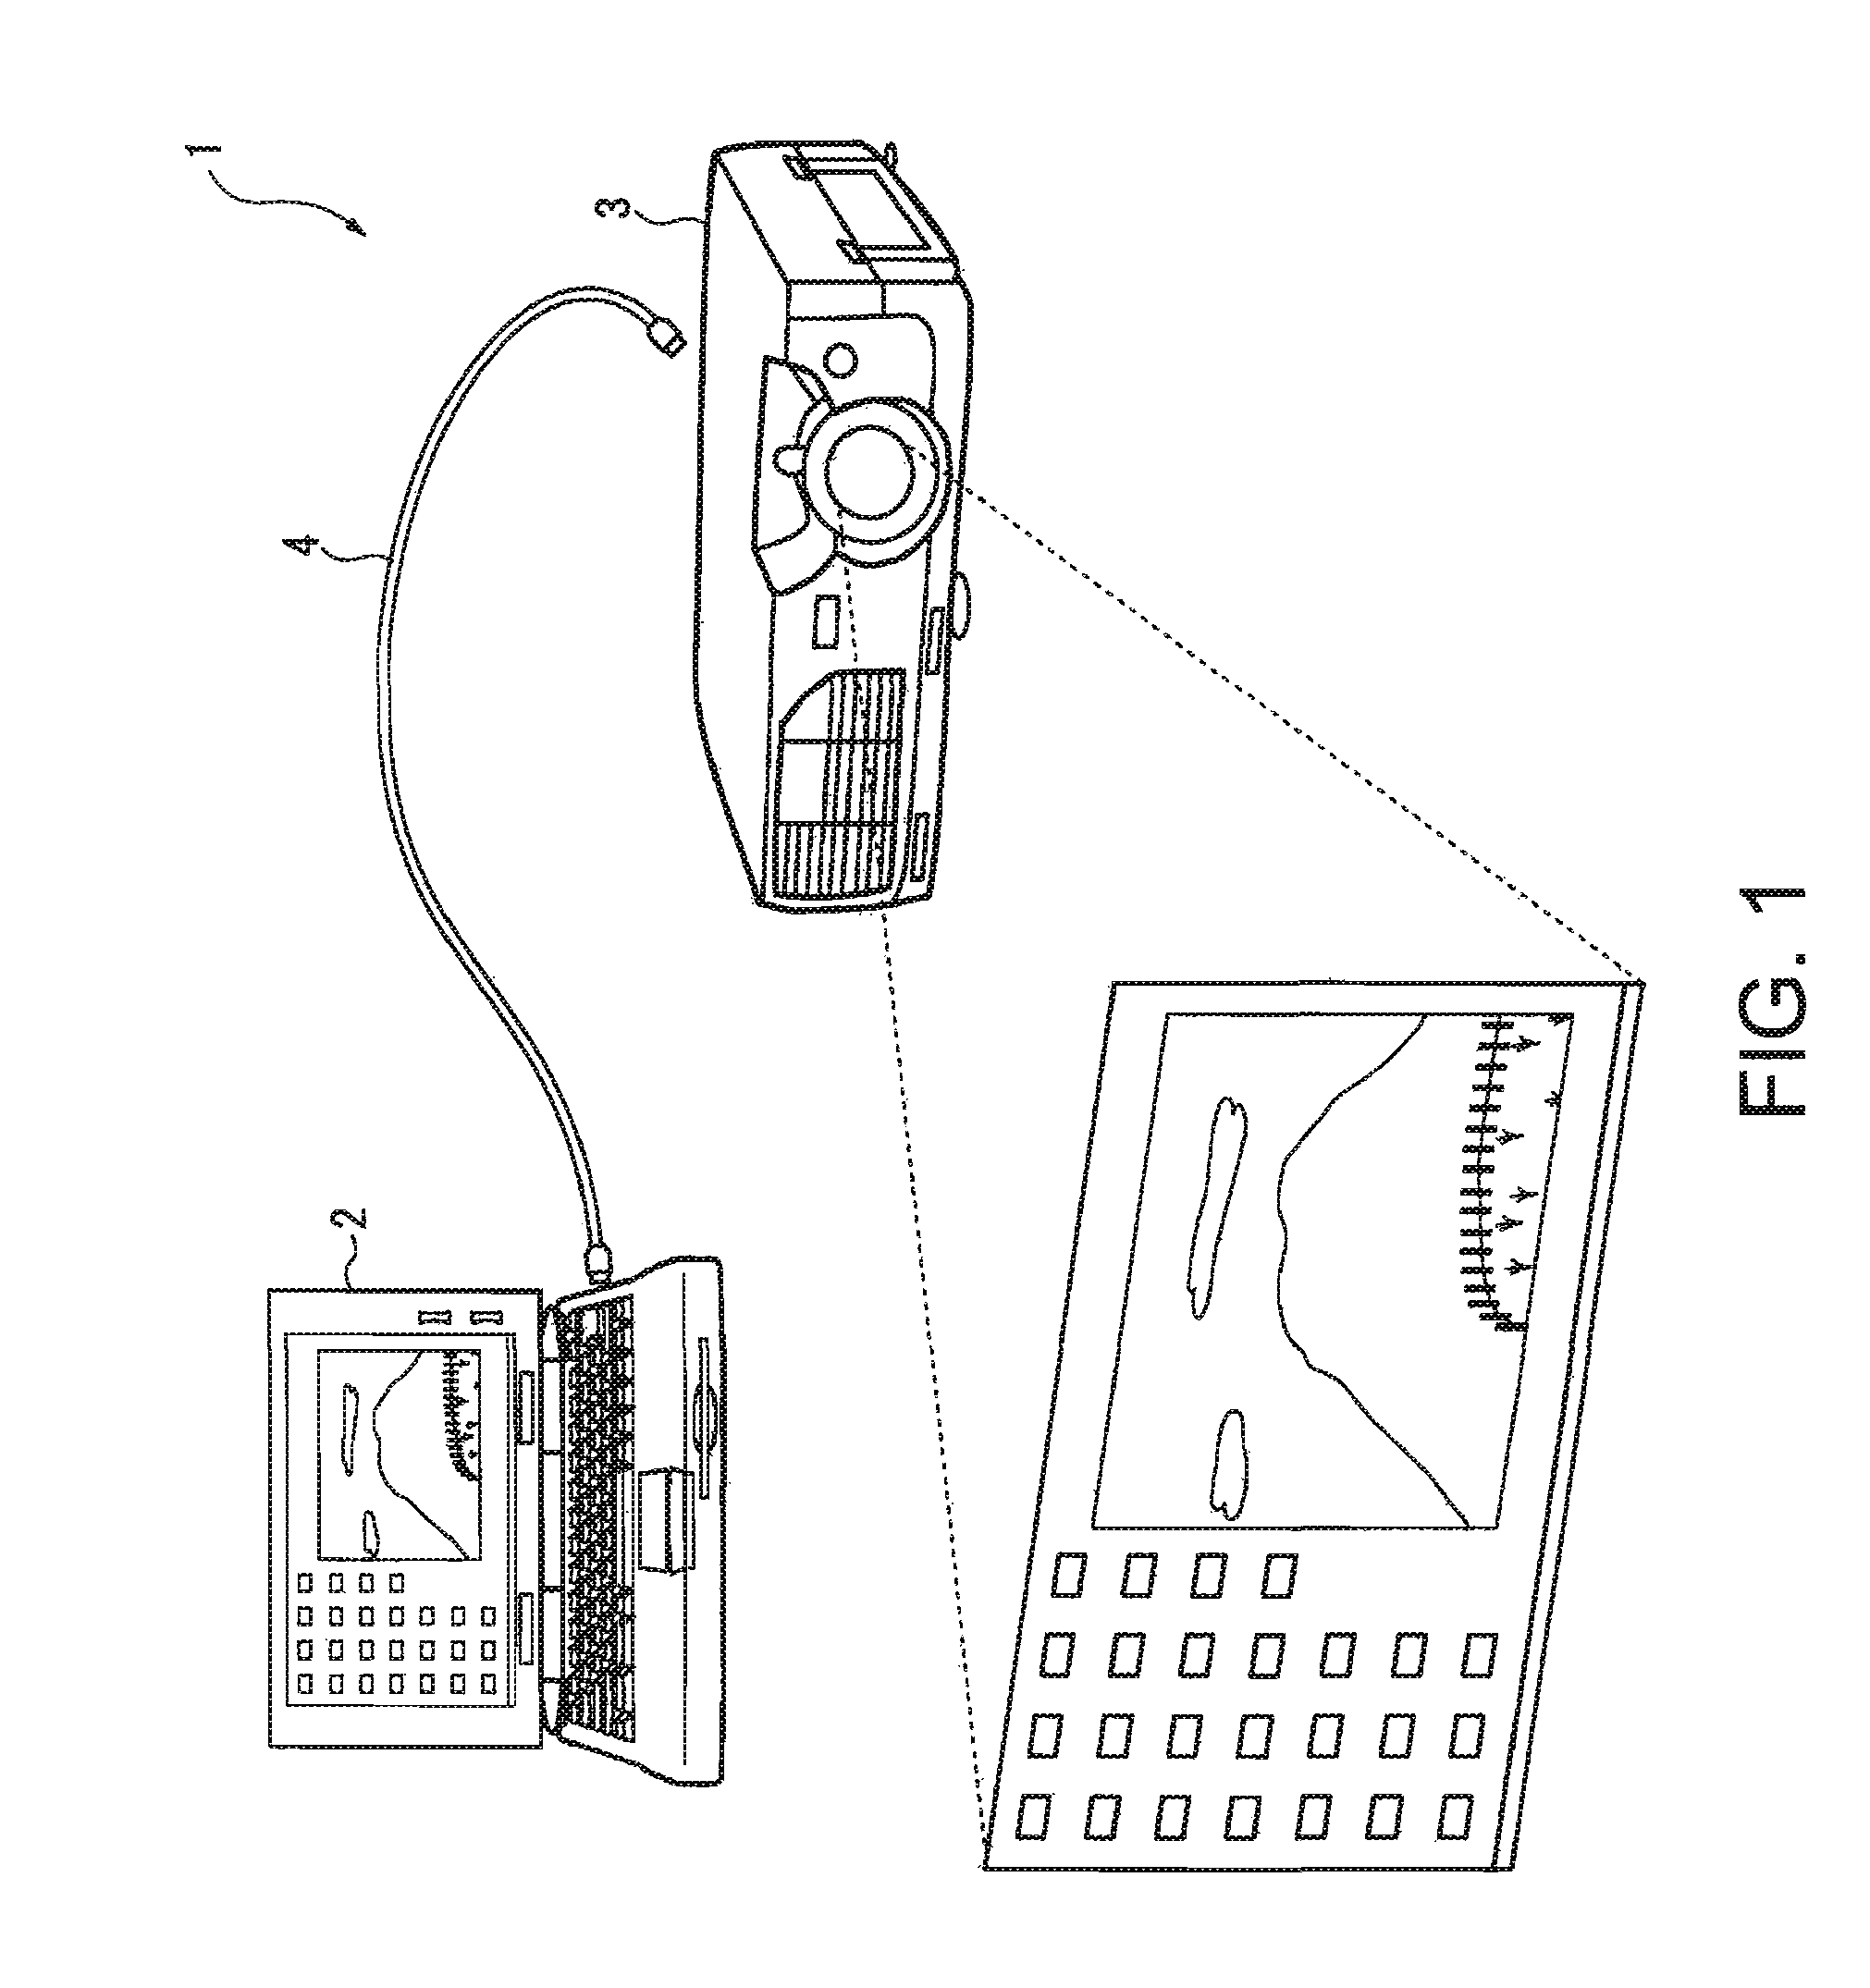 Image display system, image display device, and image data output device